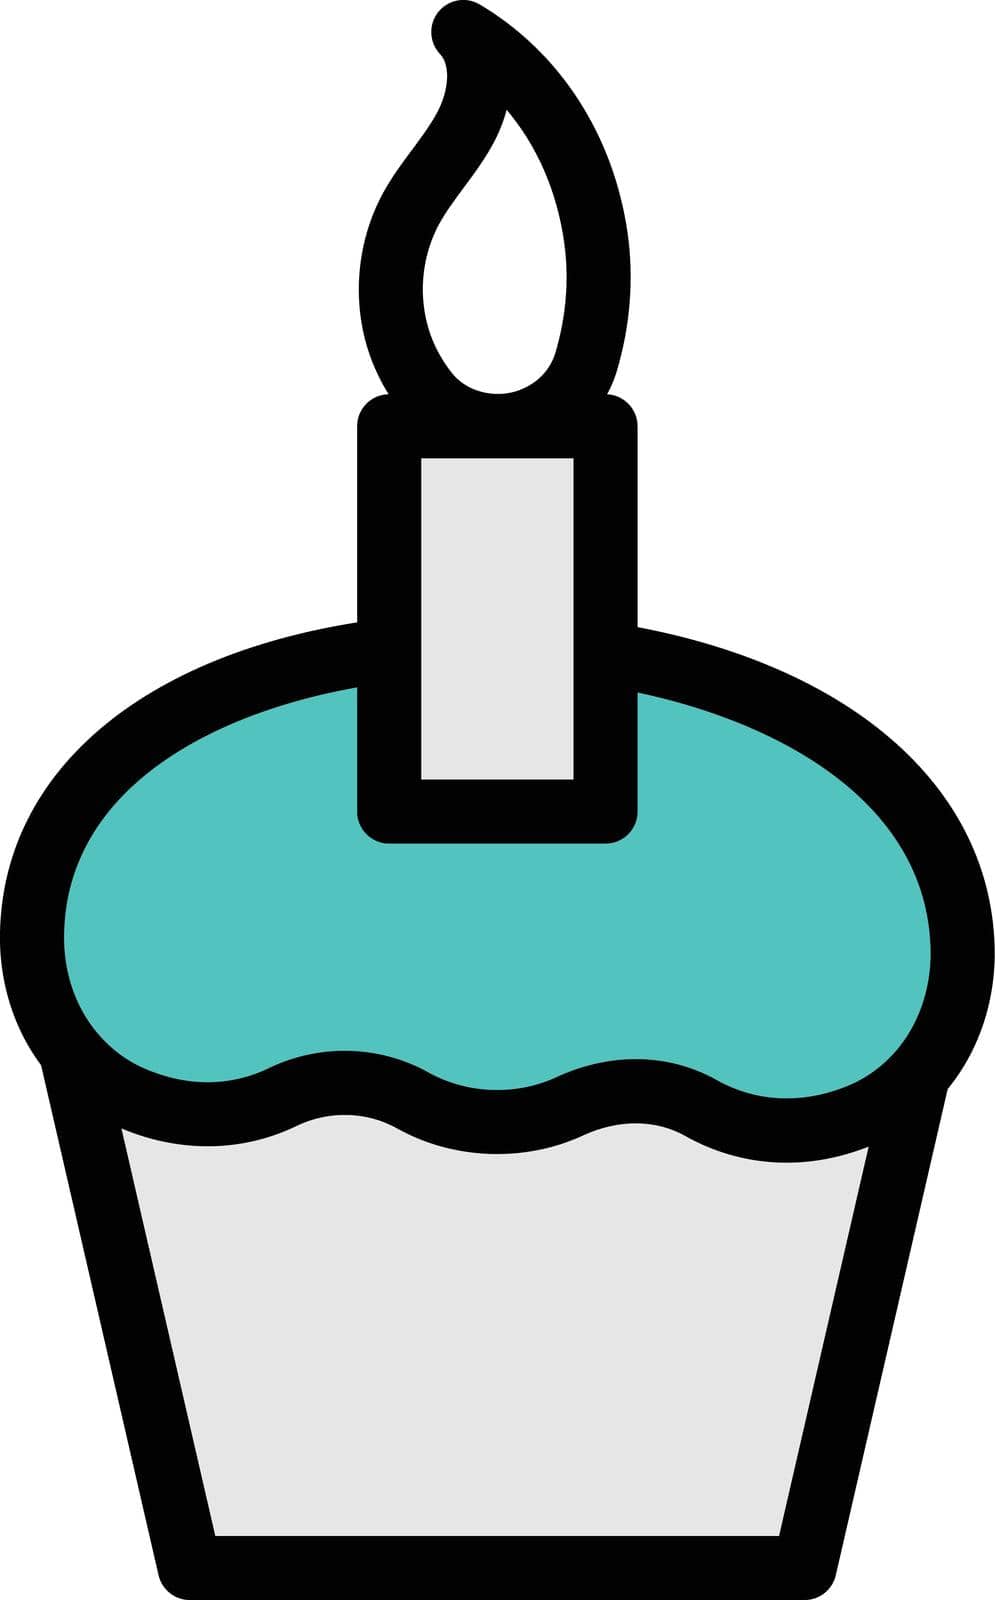 cupcake vector illustration isolated on a transparent background . colour vector icons for concept or web graphics.